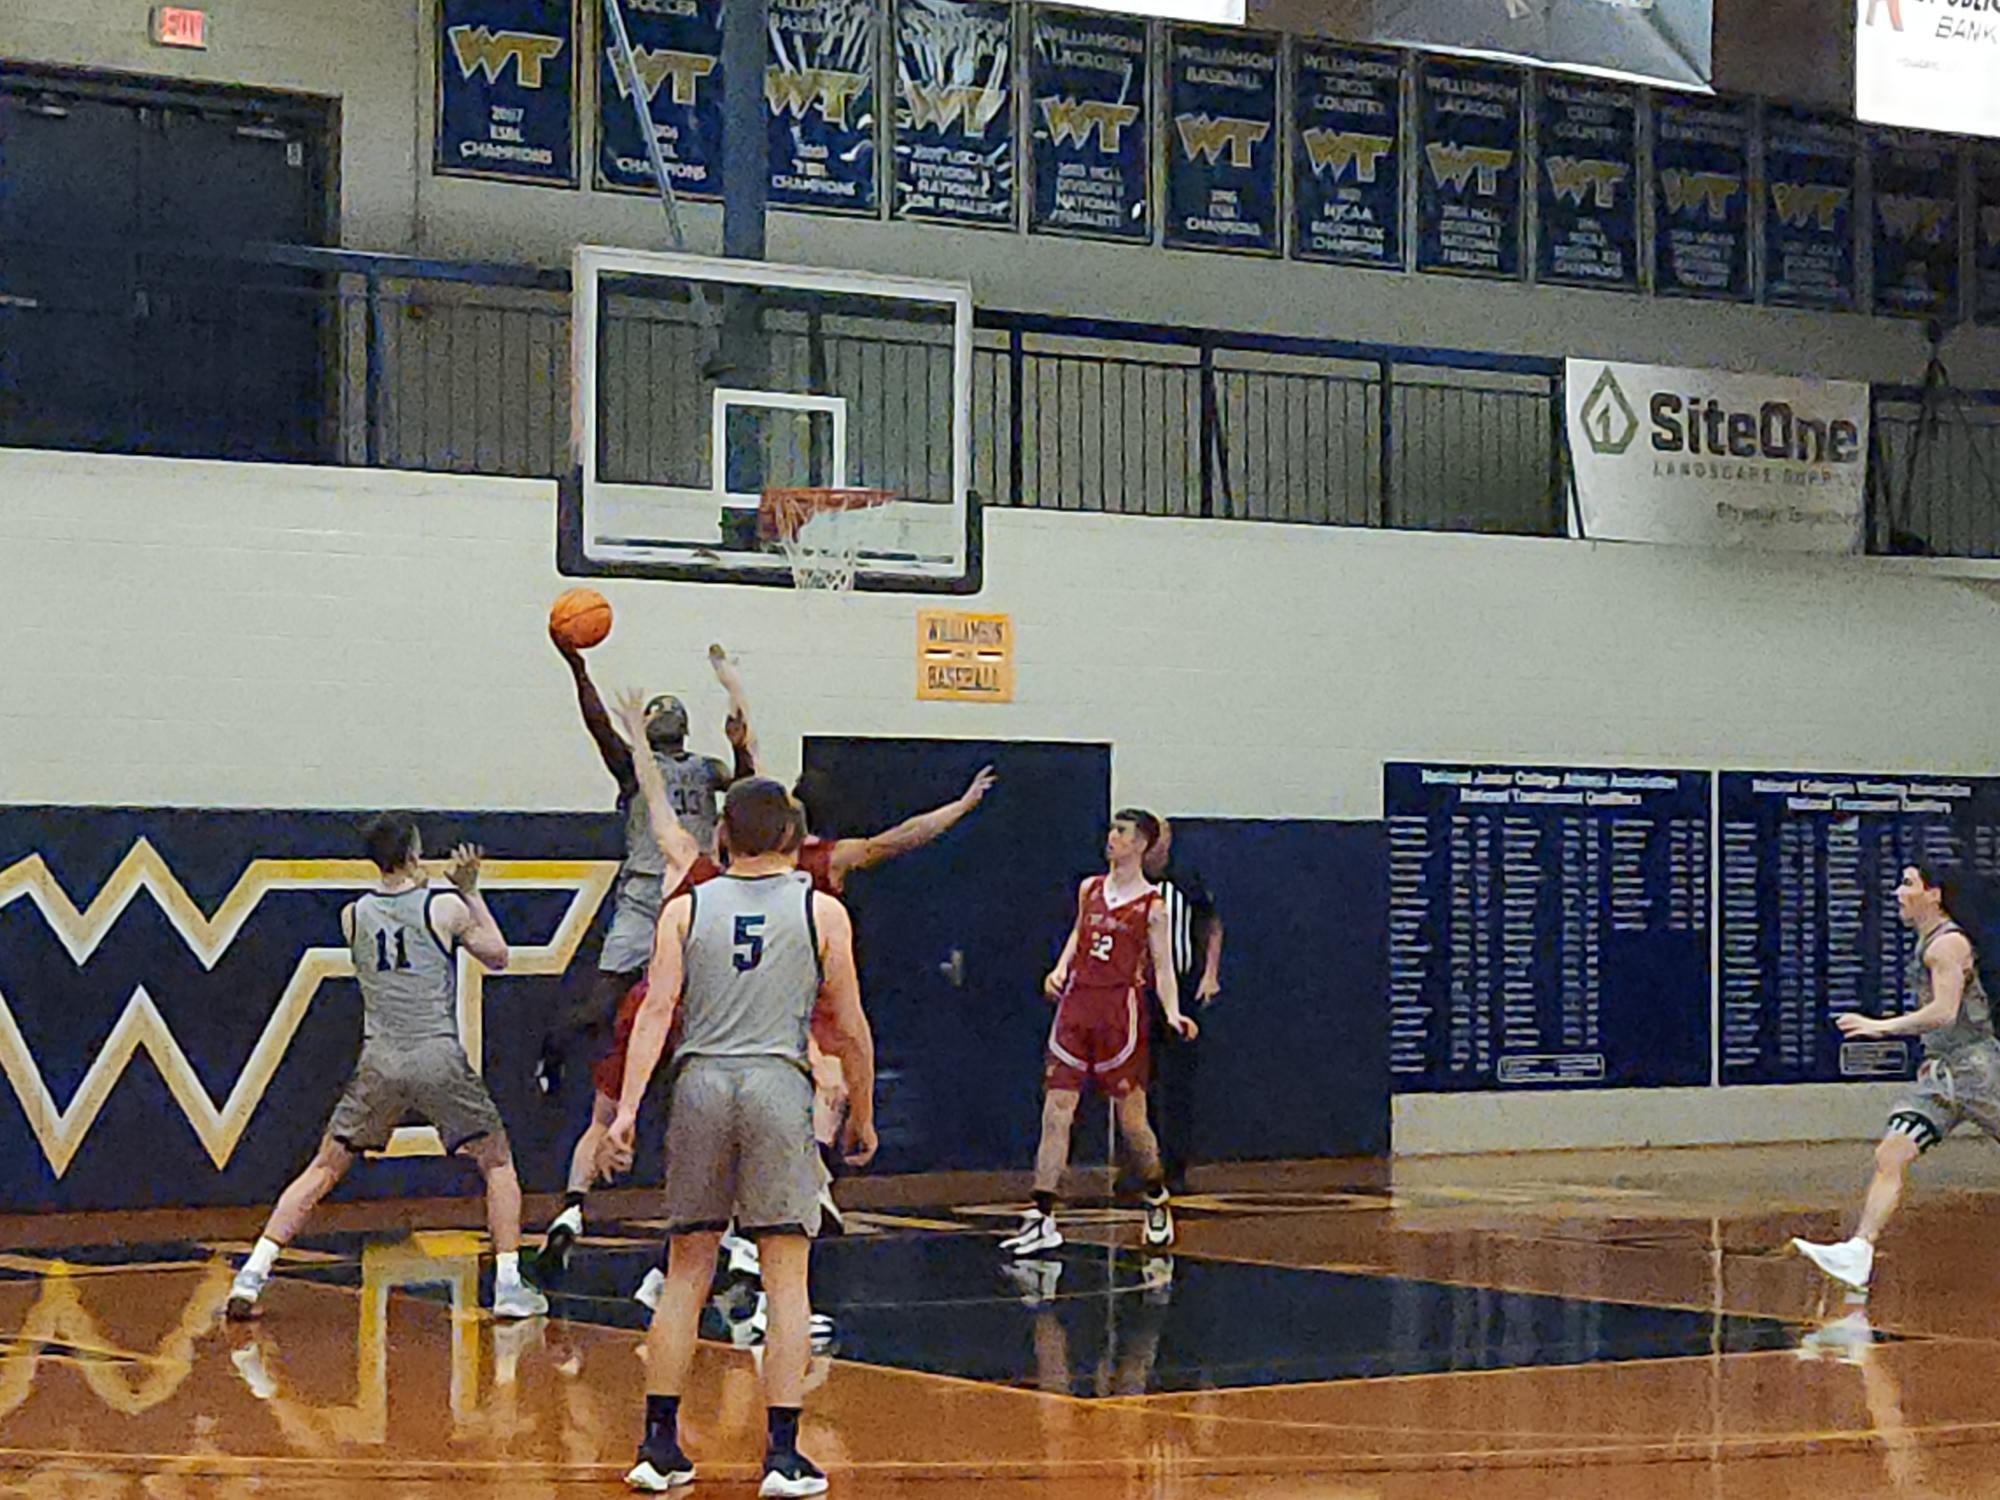 Semaj Chery hits a reverse lay-up as part of his team leading 22 points in Williamson's win over The Crown College